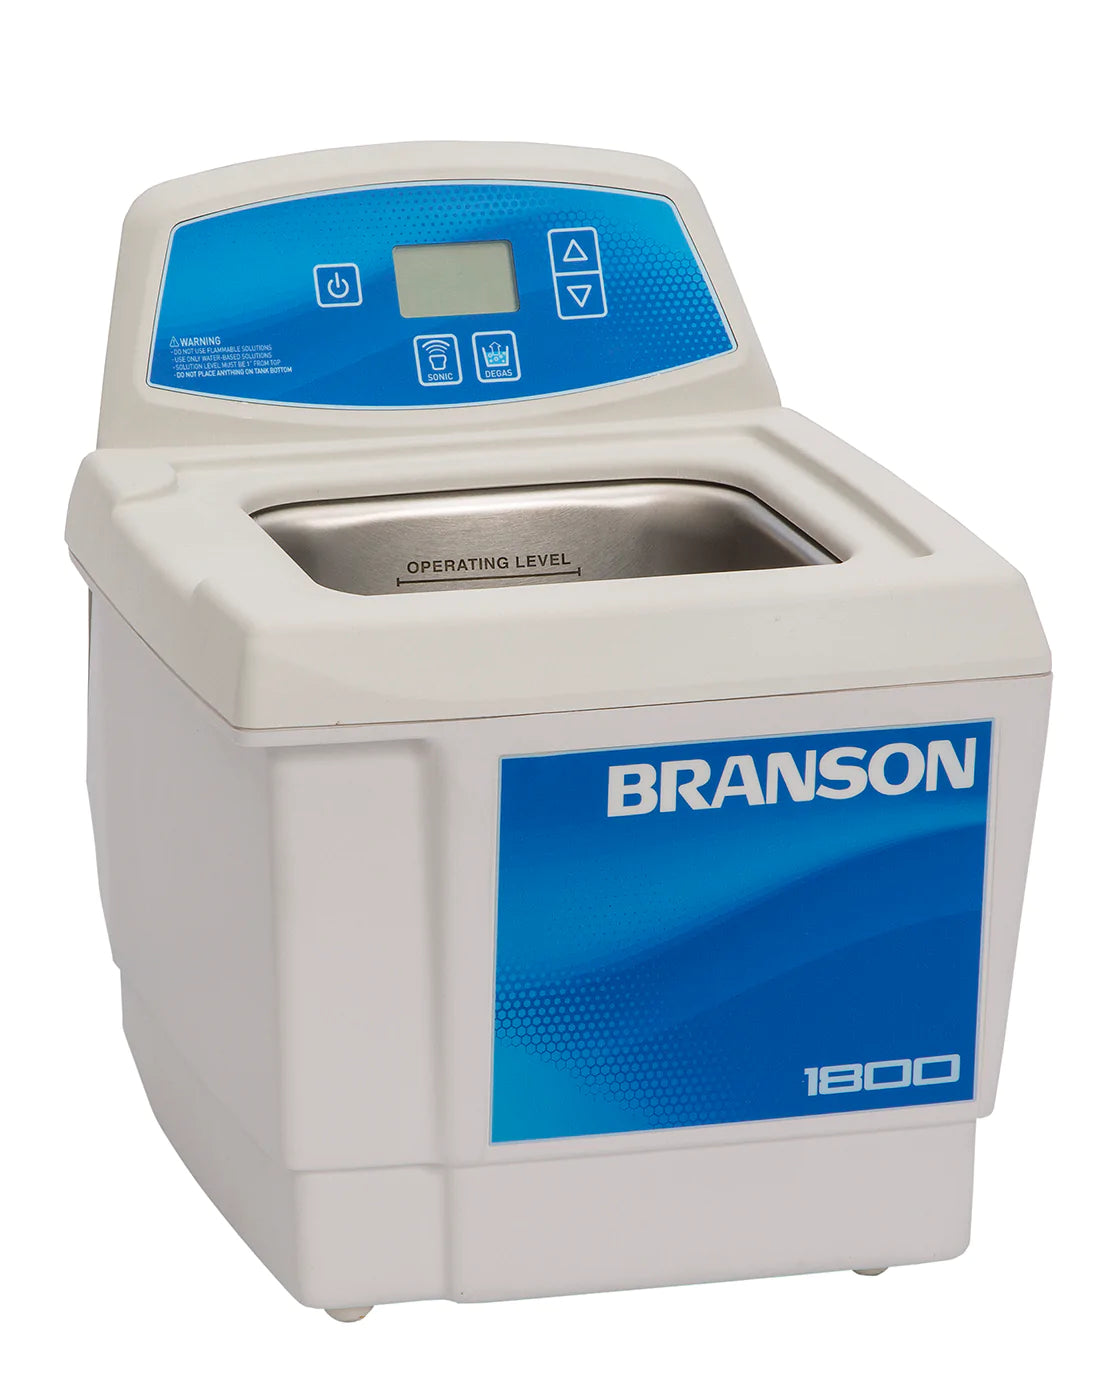 stainless-steel-perforated-tray-for-branson-2500-2800-ultrasonic-cleaners-100-410-162